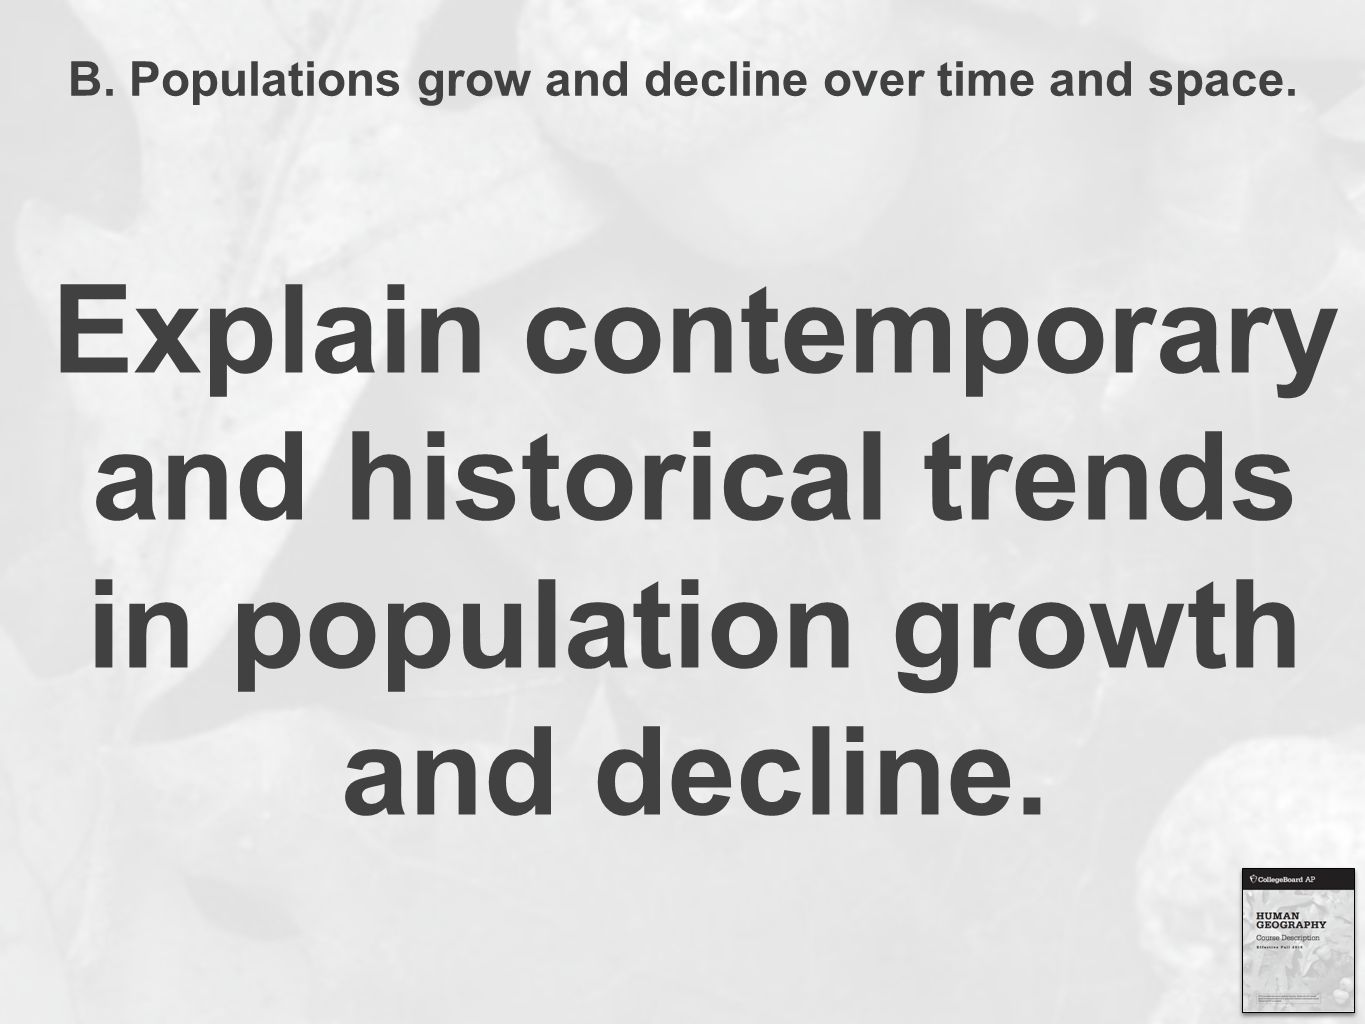 B. Populations grow and decline over time and space.